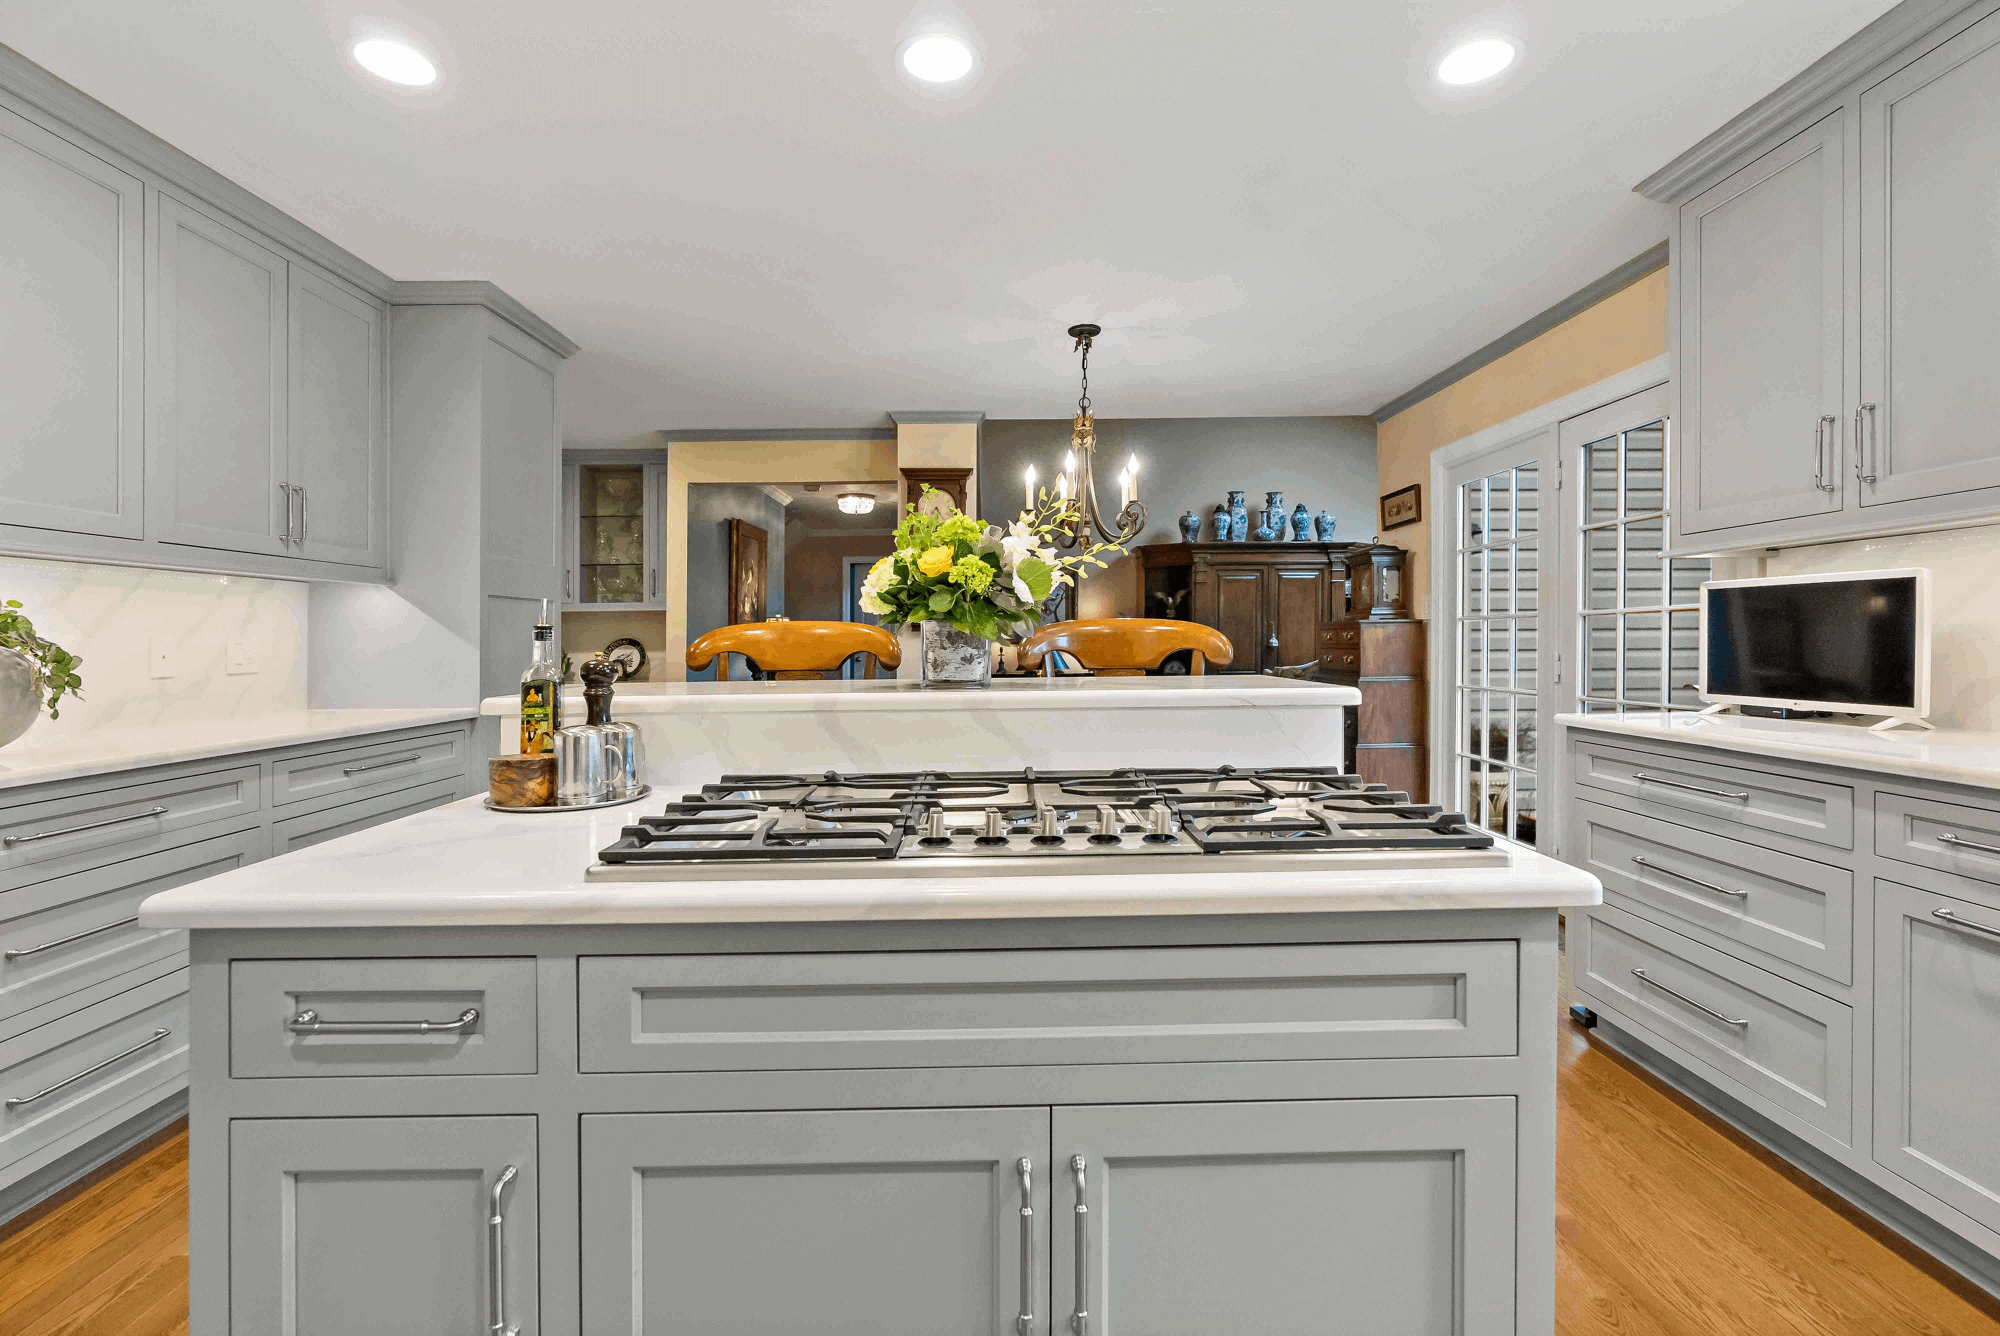 Gas fire stove top and grey cabinets in kitchen island